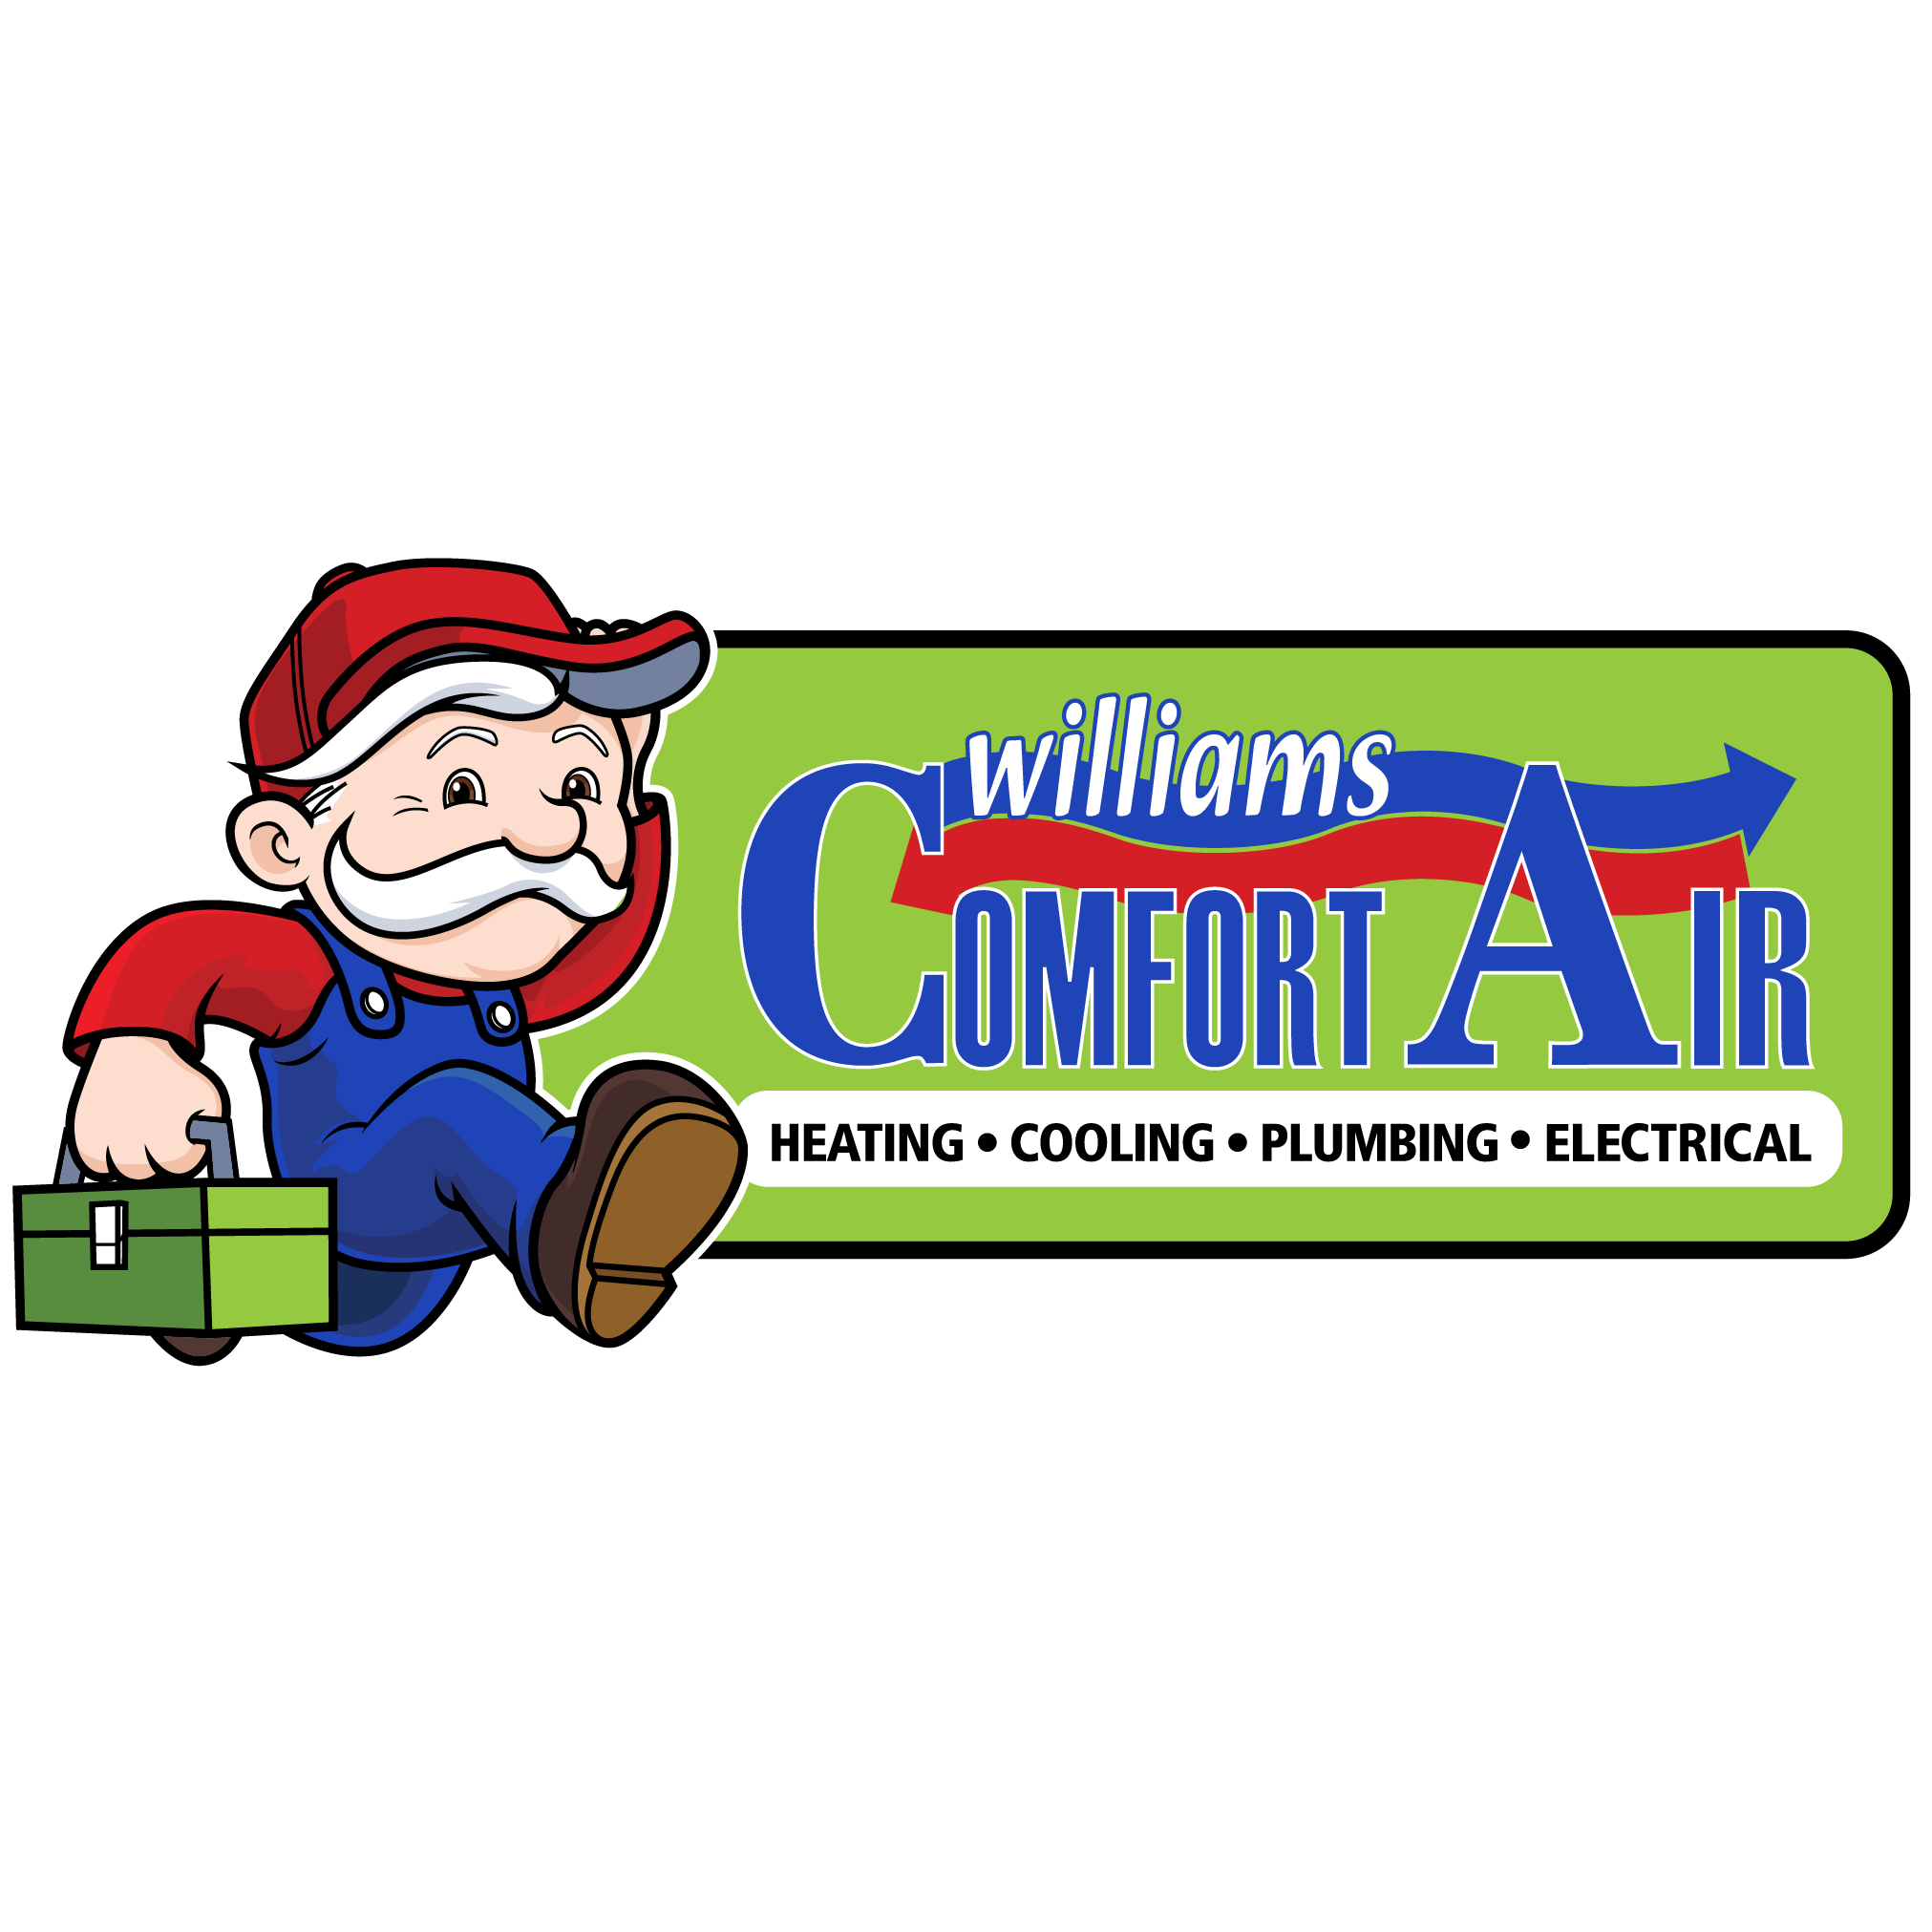 Williams Comfort Air - Indianapolis, IN 46236 - (317)217-1075 | ShowMeLocal.com